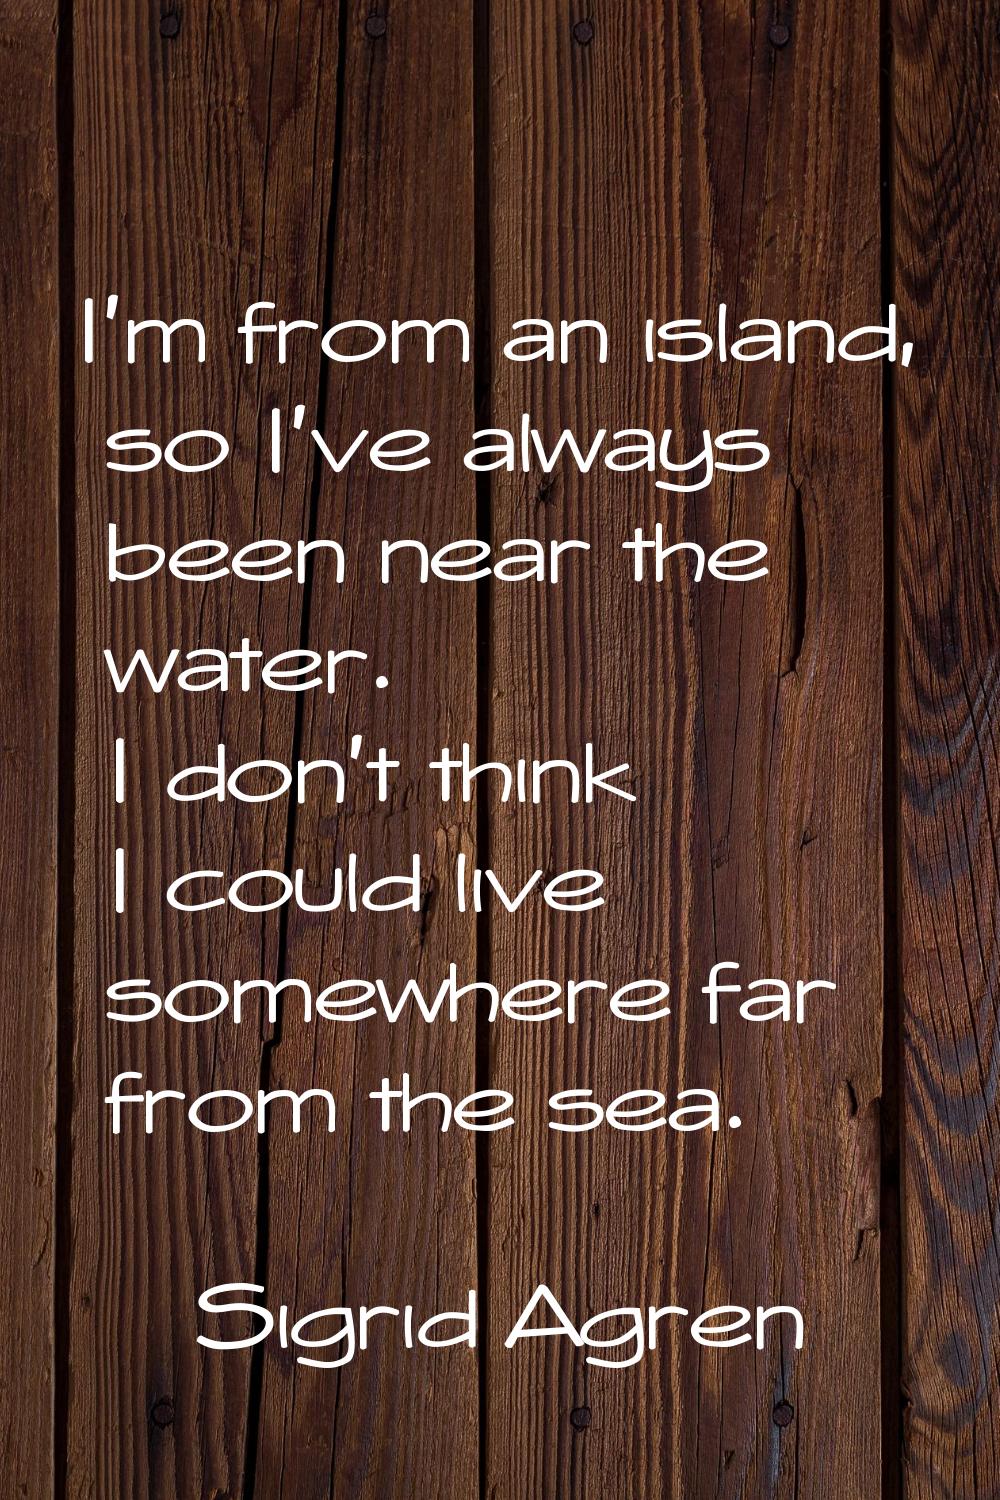 I'm from an island, so I've always been near the water. I don't think I could live somewhere far fr